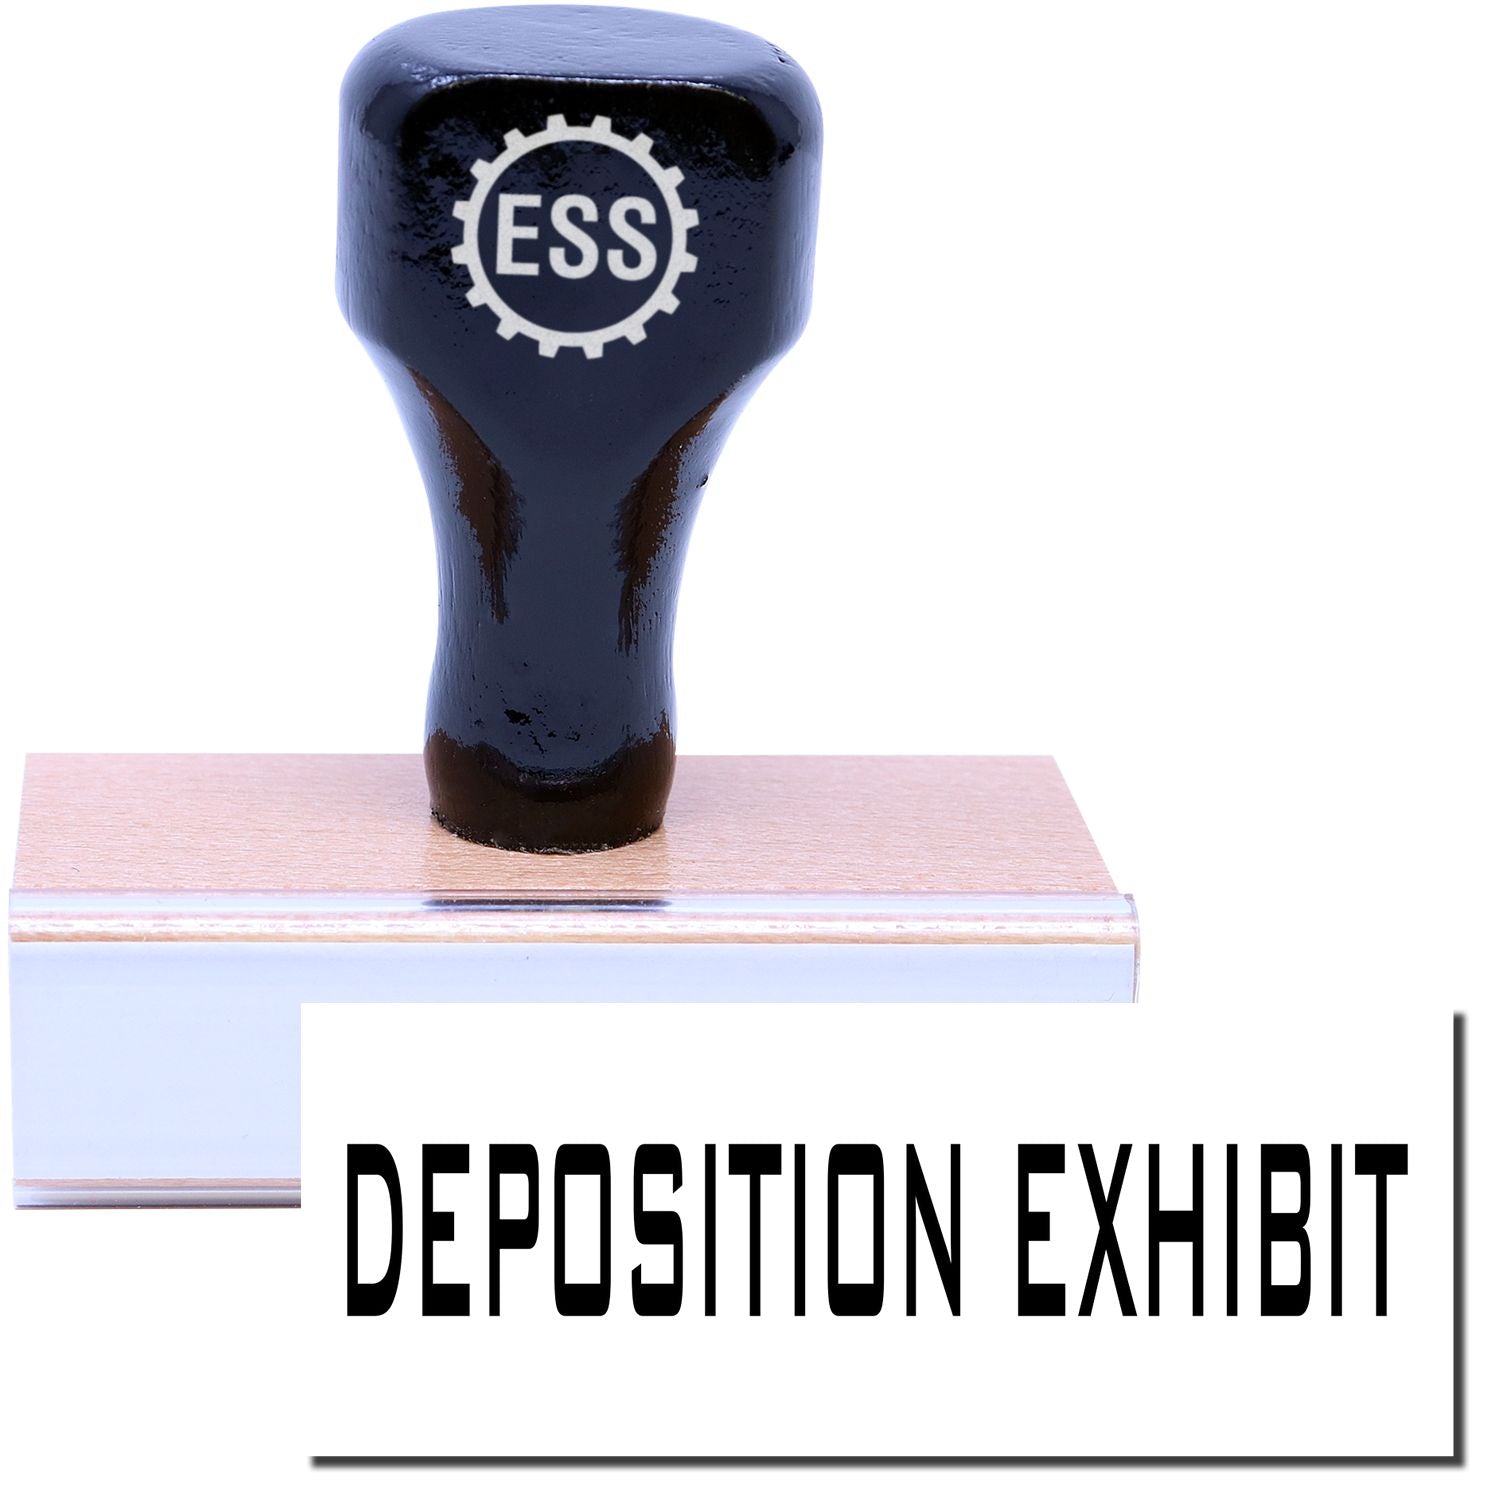 A stock office rubber stamp with a stamped image showing how the text "DEPOSITION EXHIBIT" is displayed after stamping.